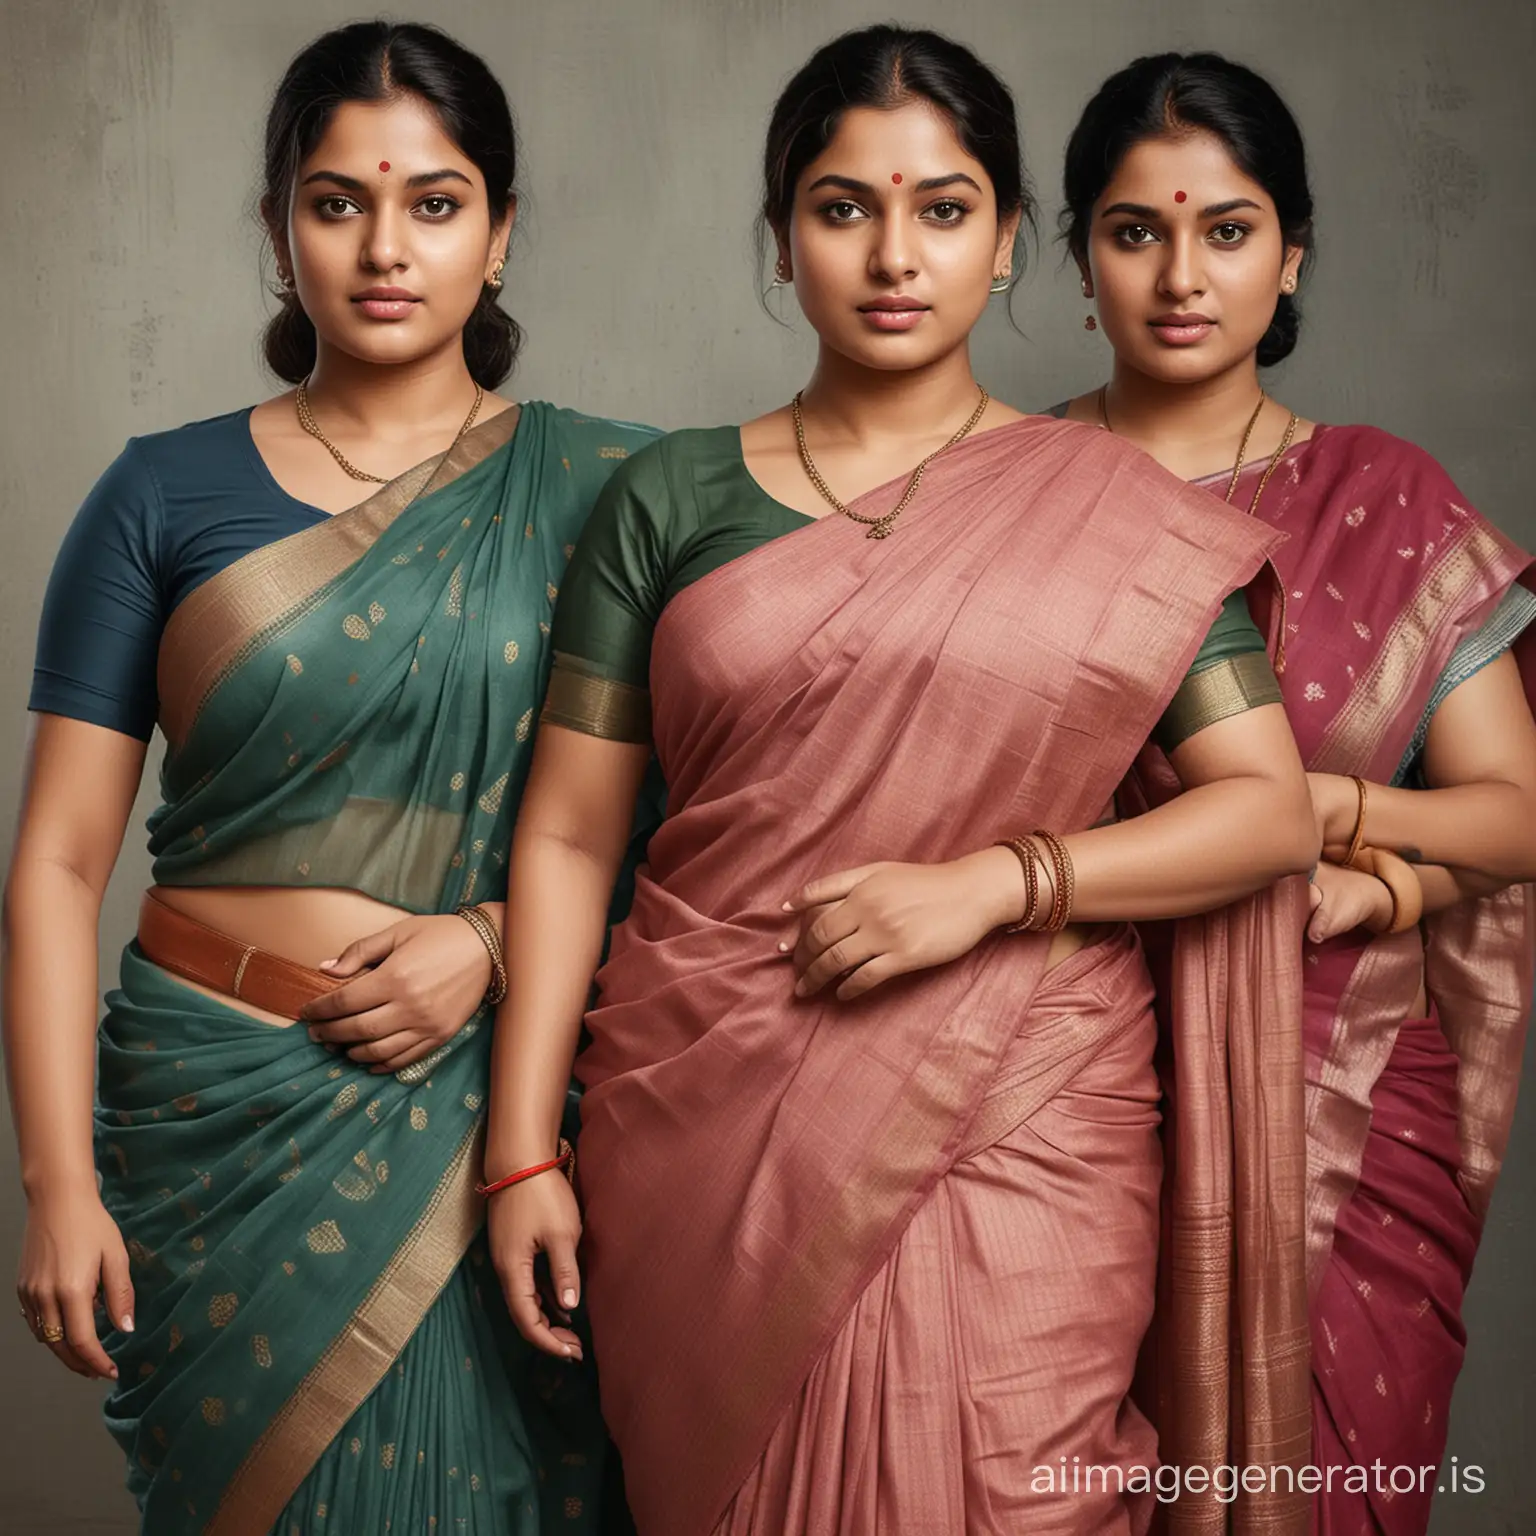 Hyper realistic image of the Indian plus size women on saree, arrested by the Indian police